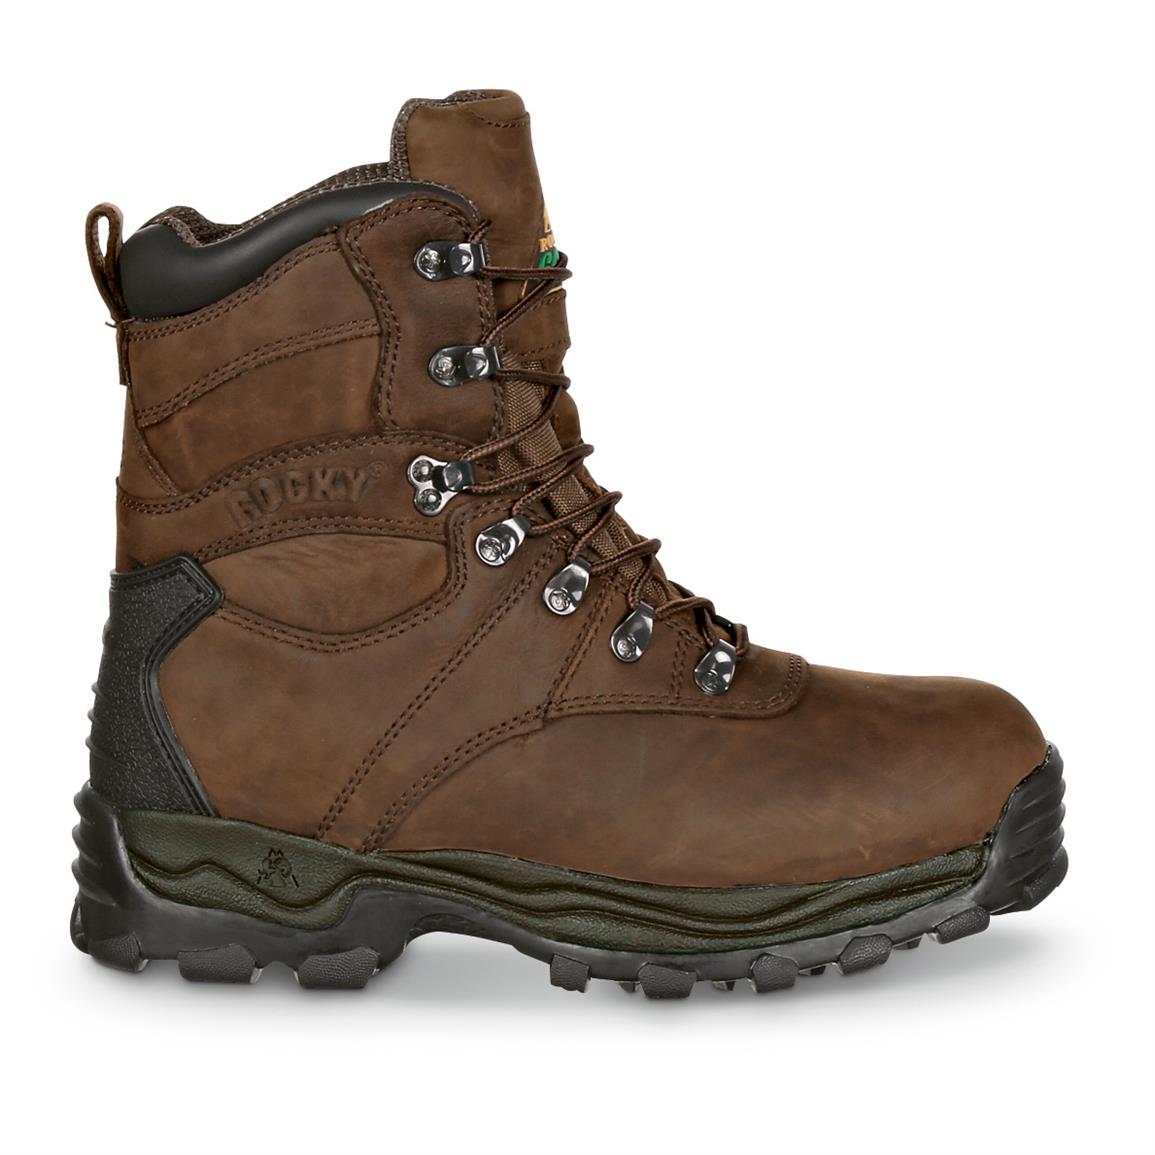 Men's Hunting Boots | Sportsman's Guide